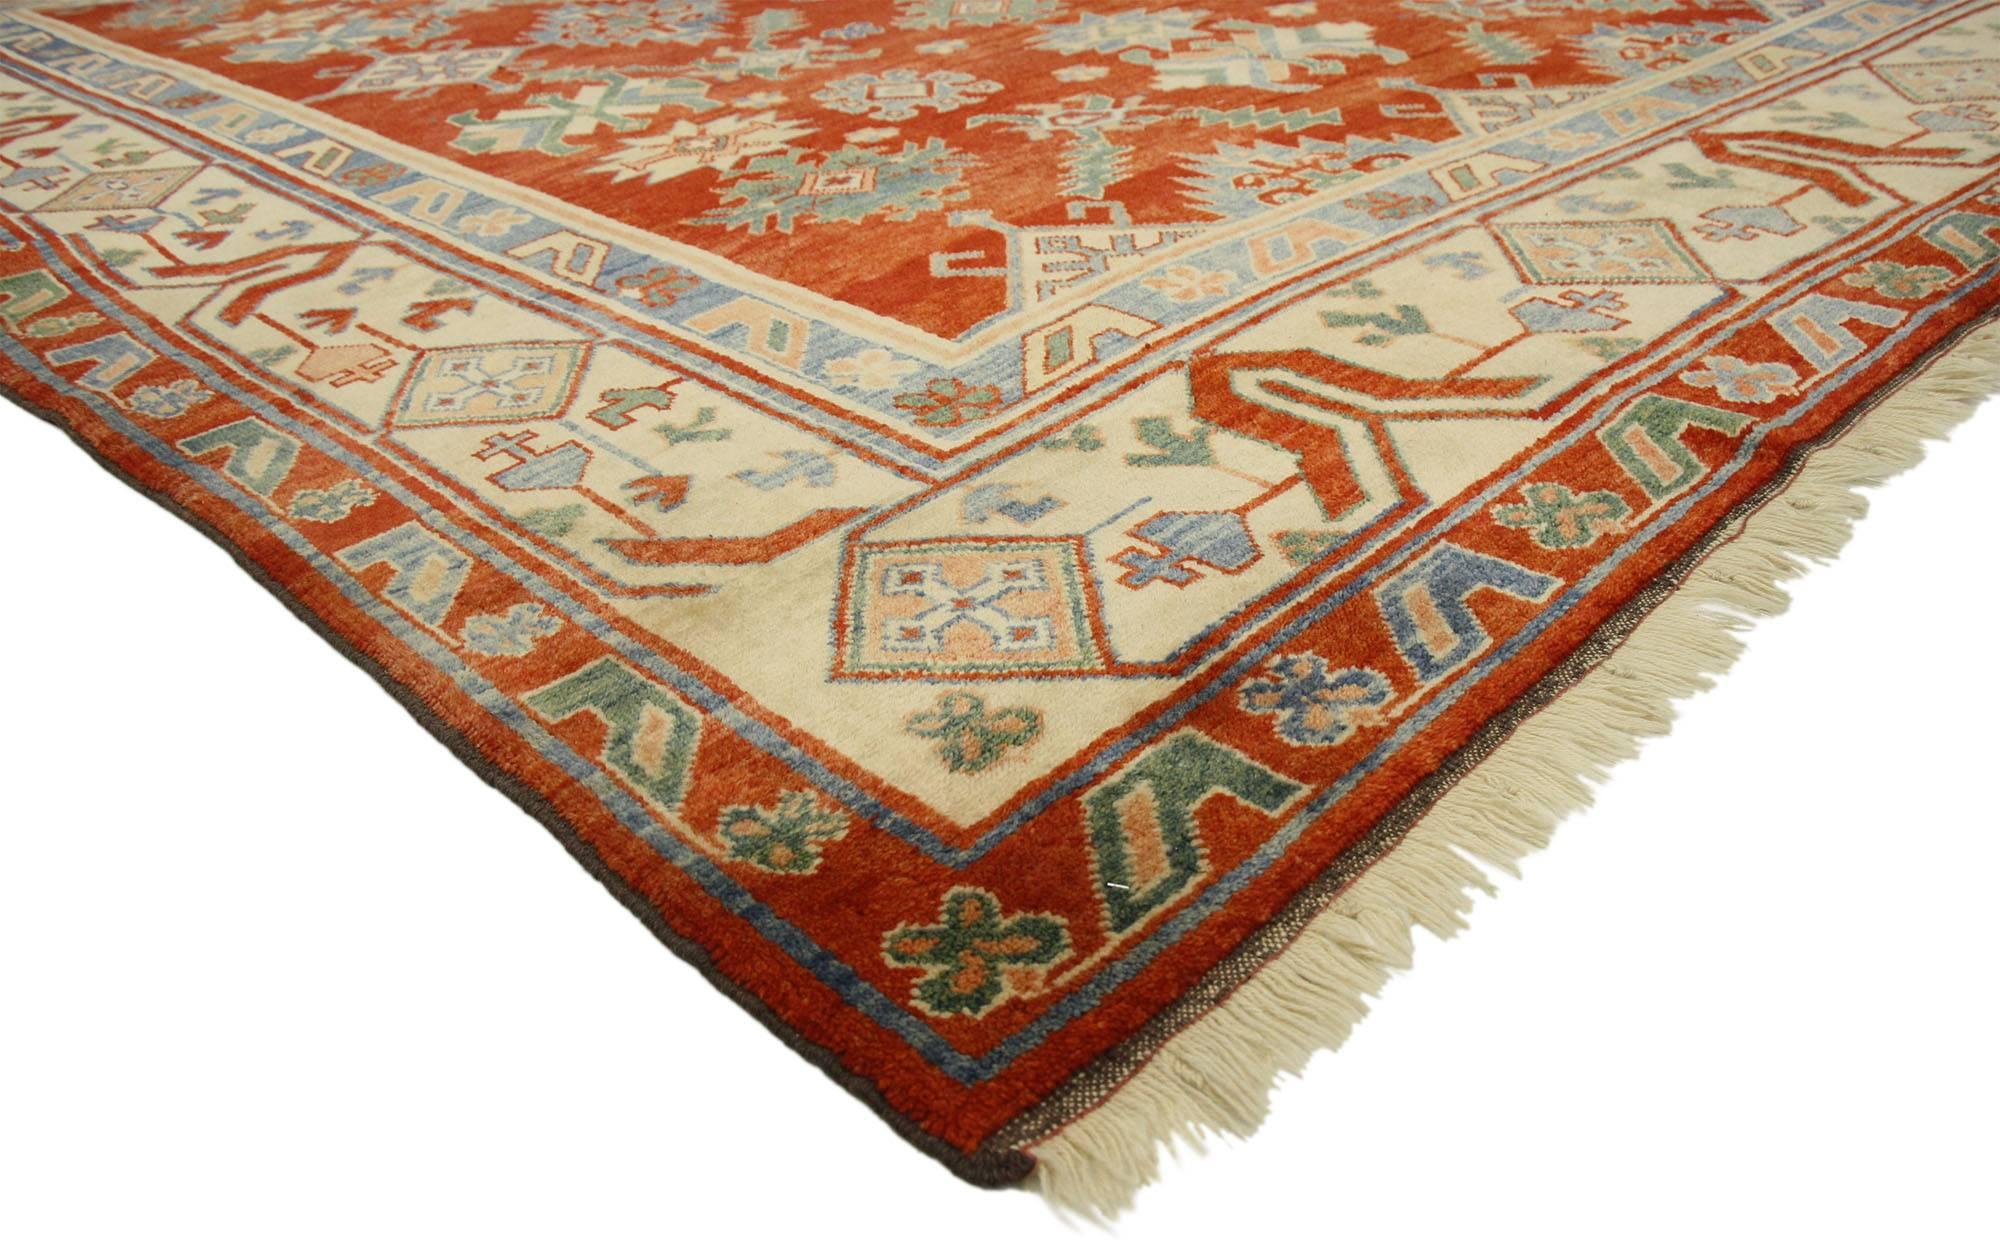 77110 Contemporary Turkish Oushak Area Rug with Modern Colonial Cape Cod Style 09'03 x 11'10. ​Blending elements from the modern world with vibrant colors, this hand knotted wool contemporary Turkish Oushak rug will boost the coziness factor in